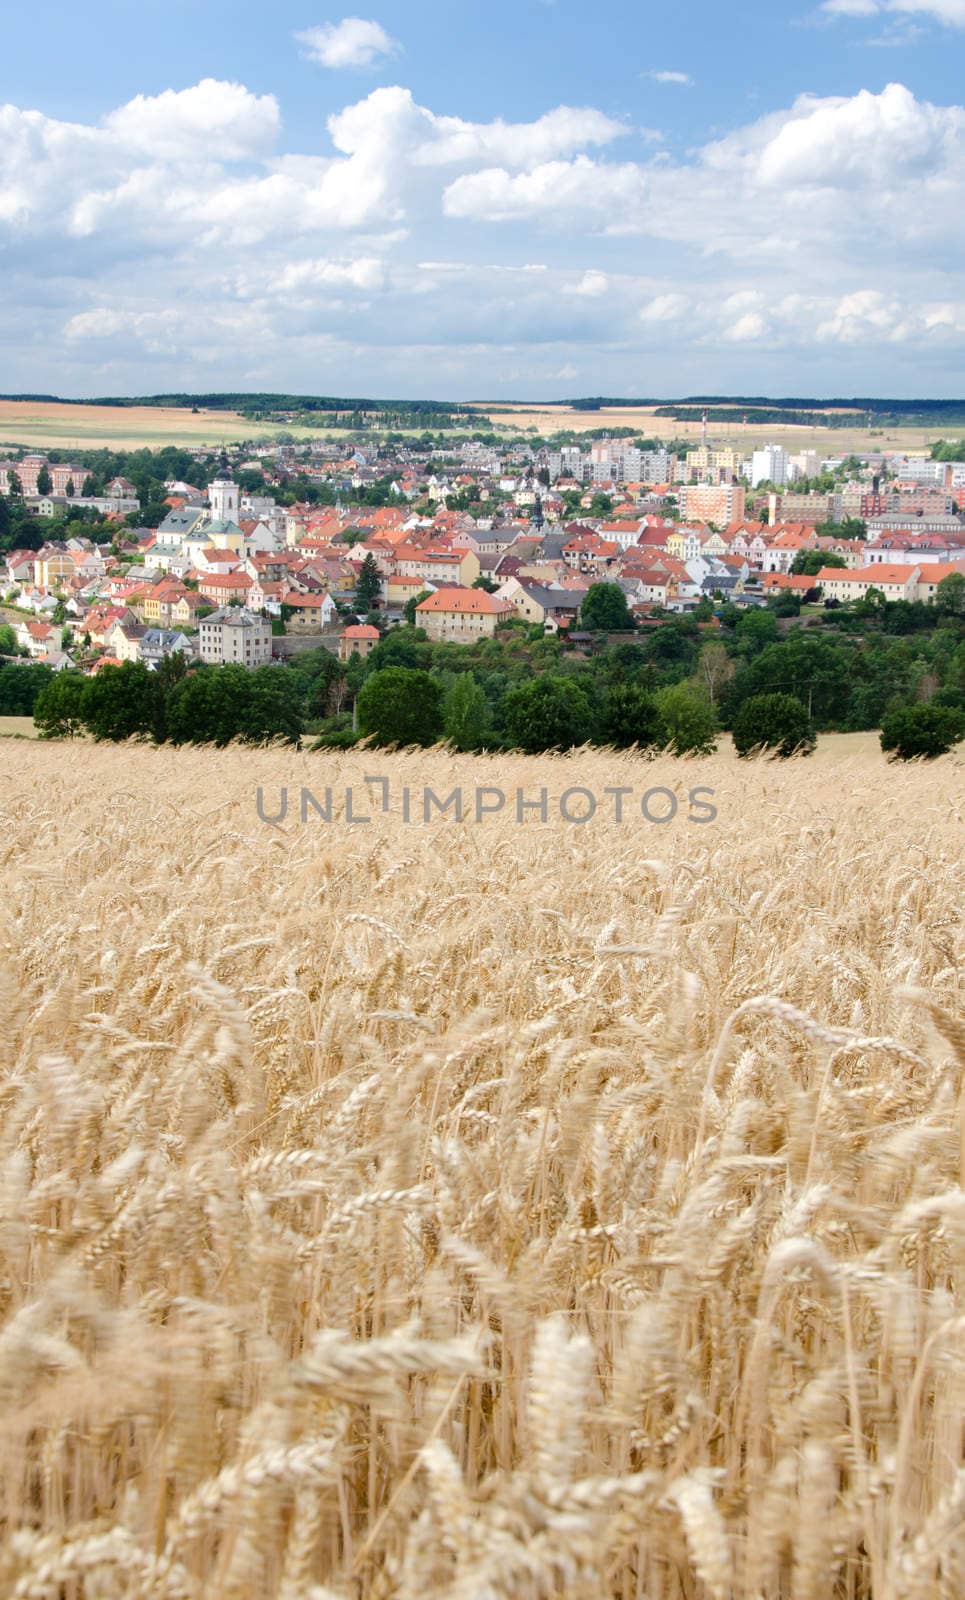 Vertical landscape shot consisting of wheat field, town and forest.